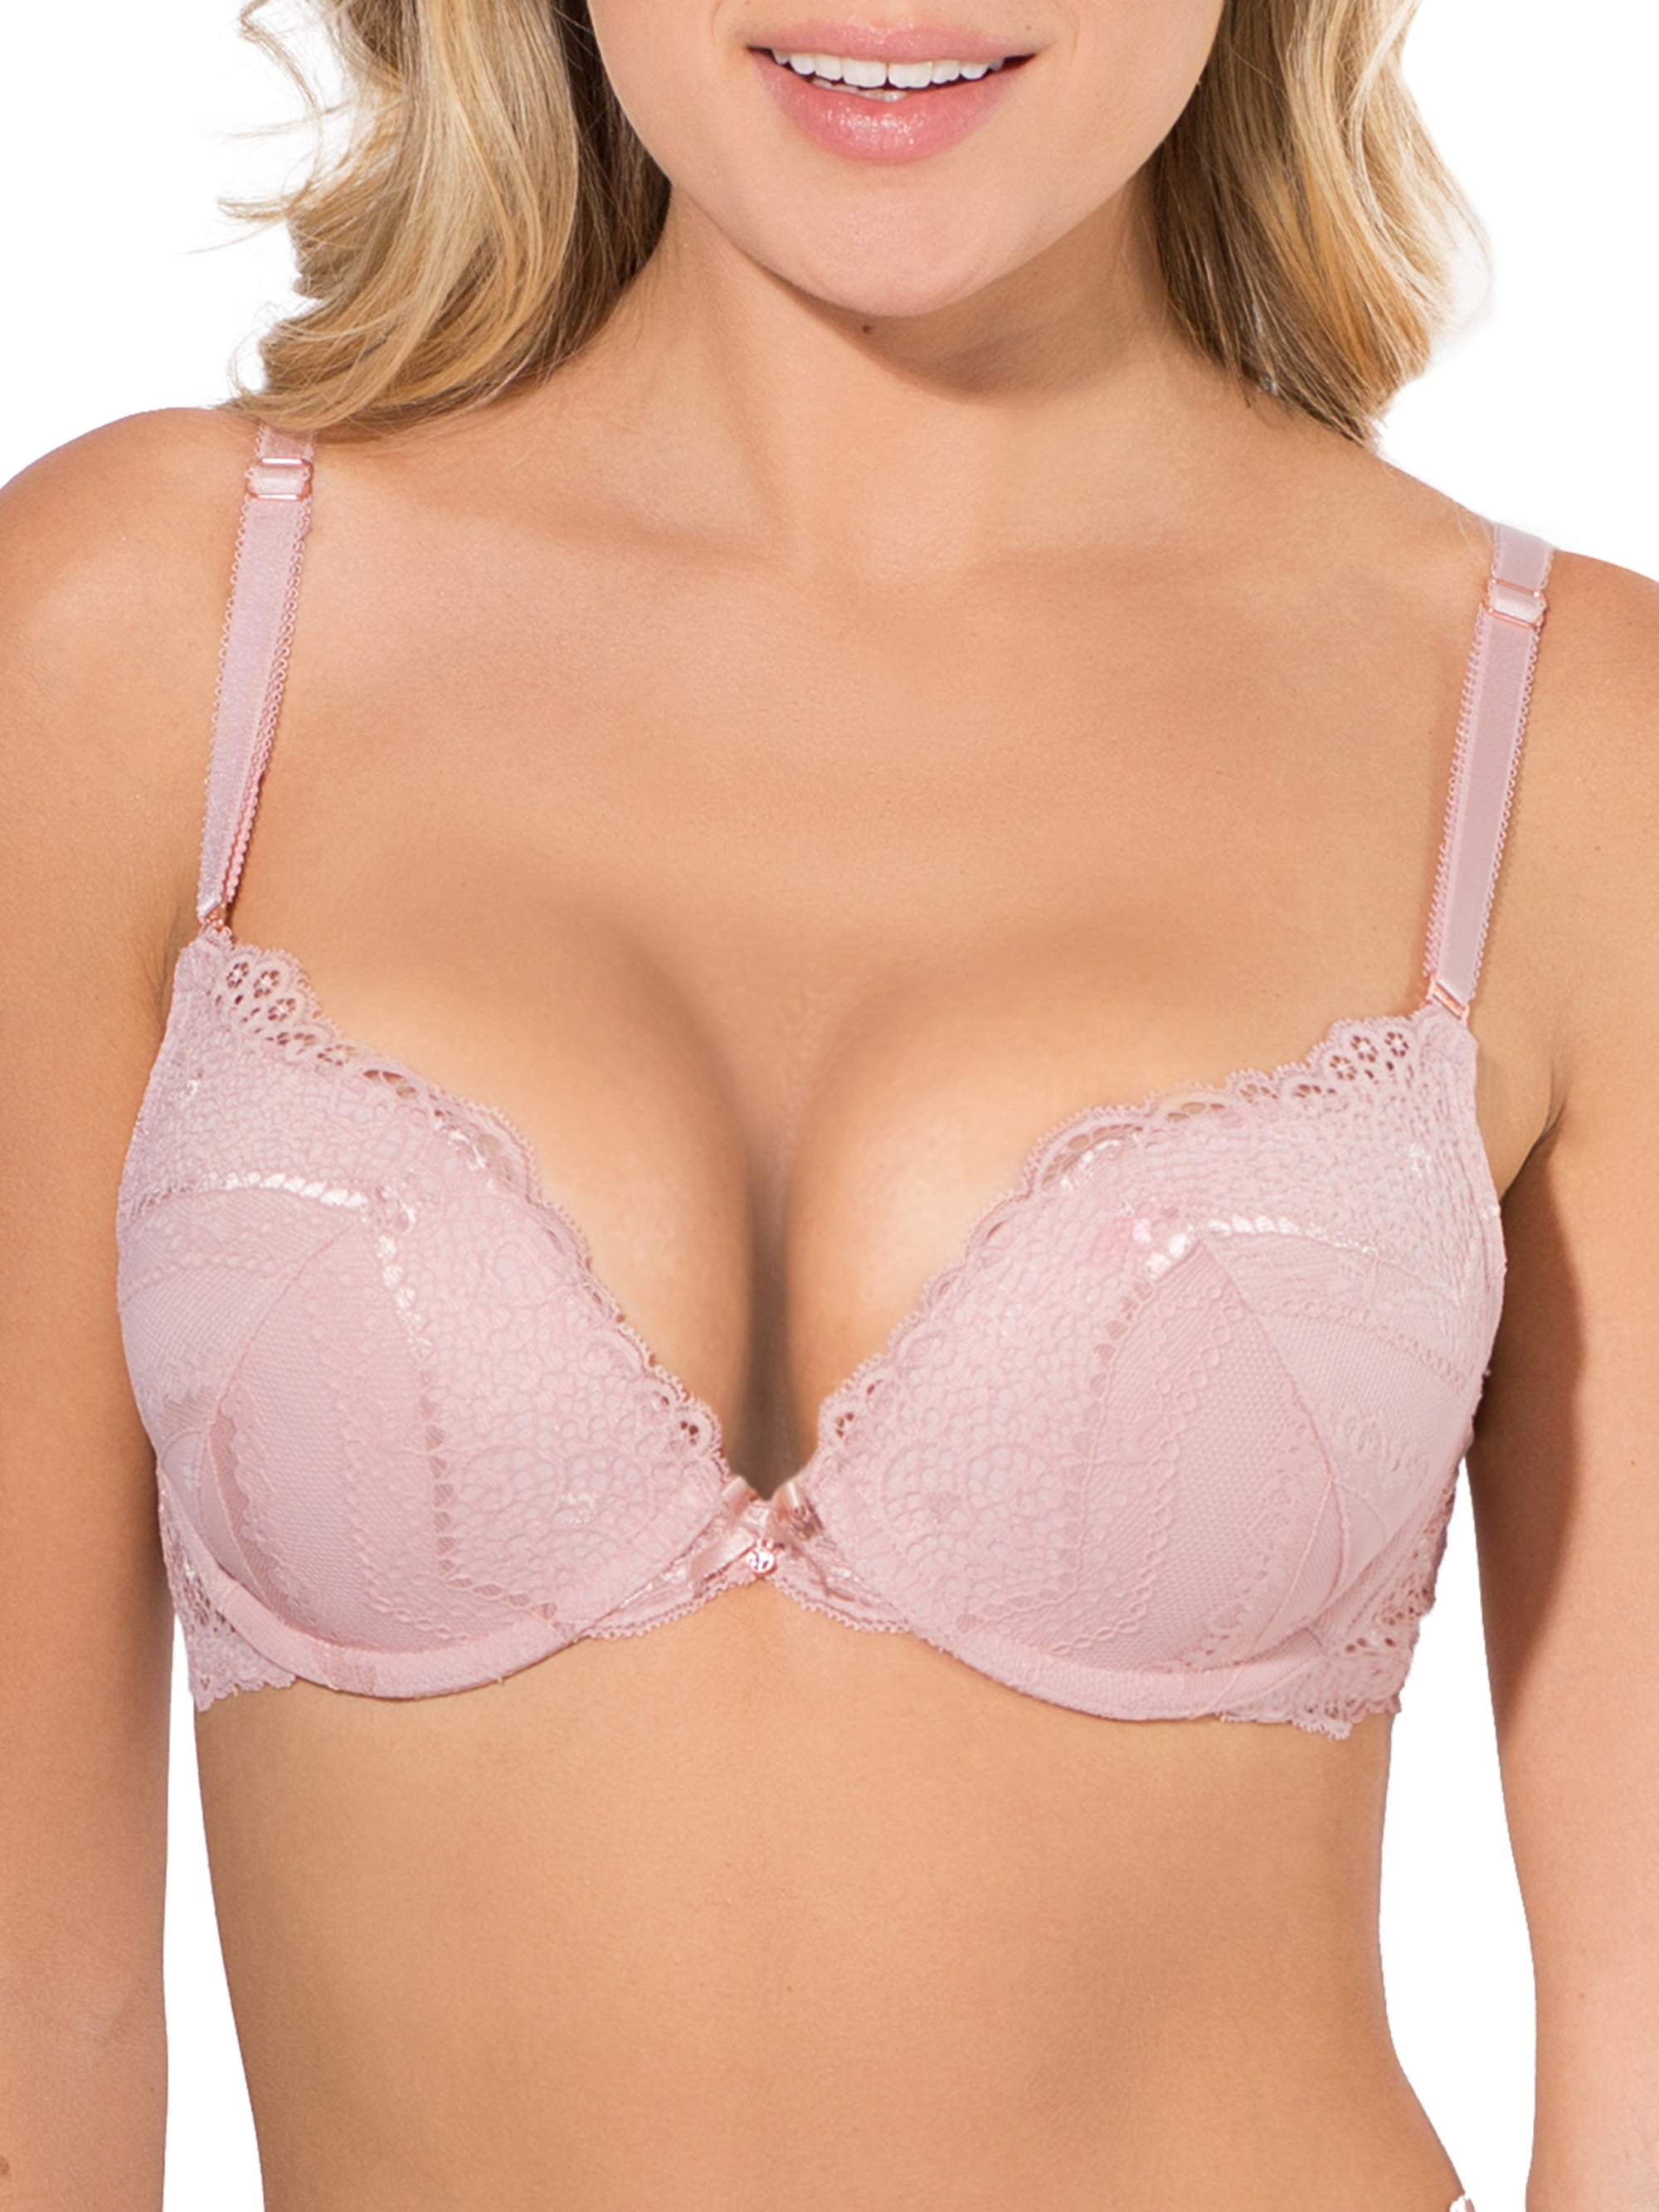 Women Smart Pushup Bra With Light Pad And Soft Alastic – 5050salepoint